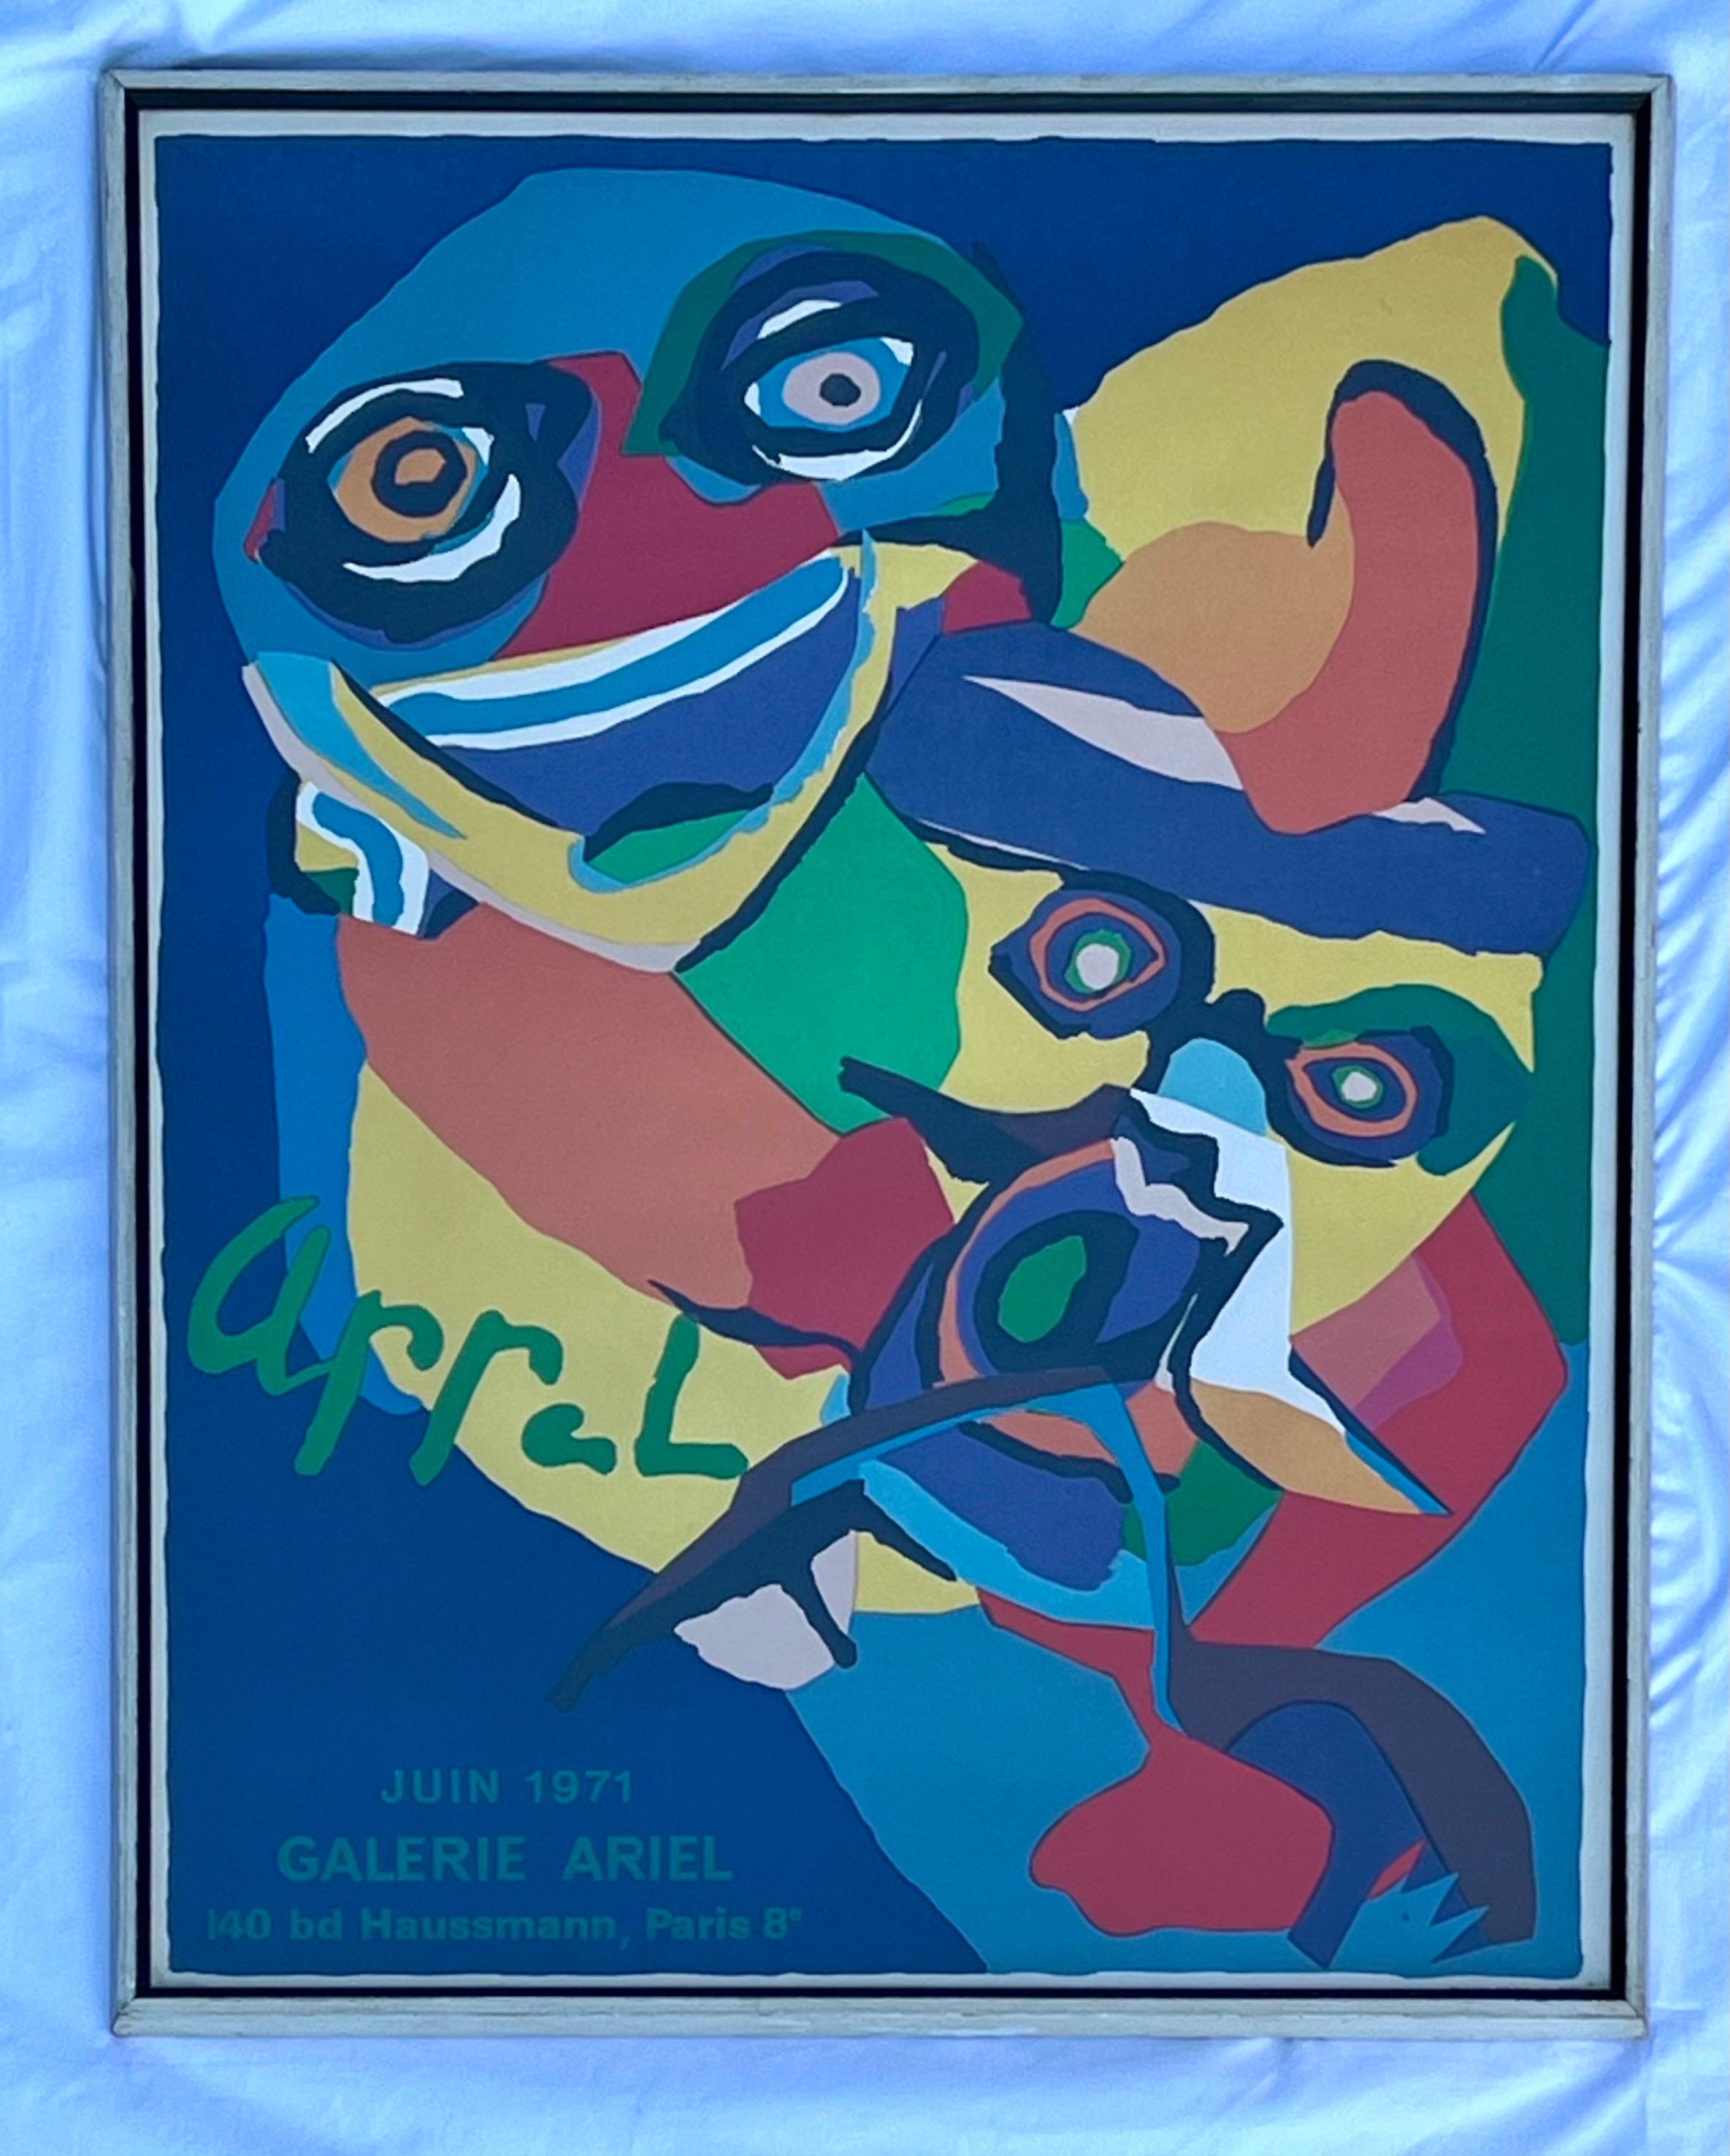 A striking vintage circa 1971 exhibition poster from the Karel Appel show at Galerie Haussmann on Boulevard Haussmann in Paris. This poster was printed by SMI in Paris. An exciting and saturated image with strong colors and bold use of space by a